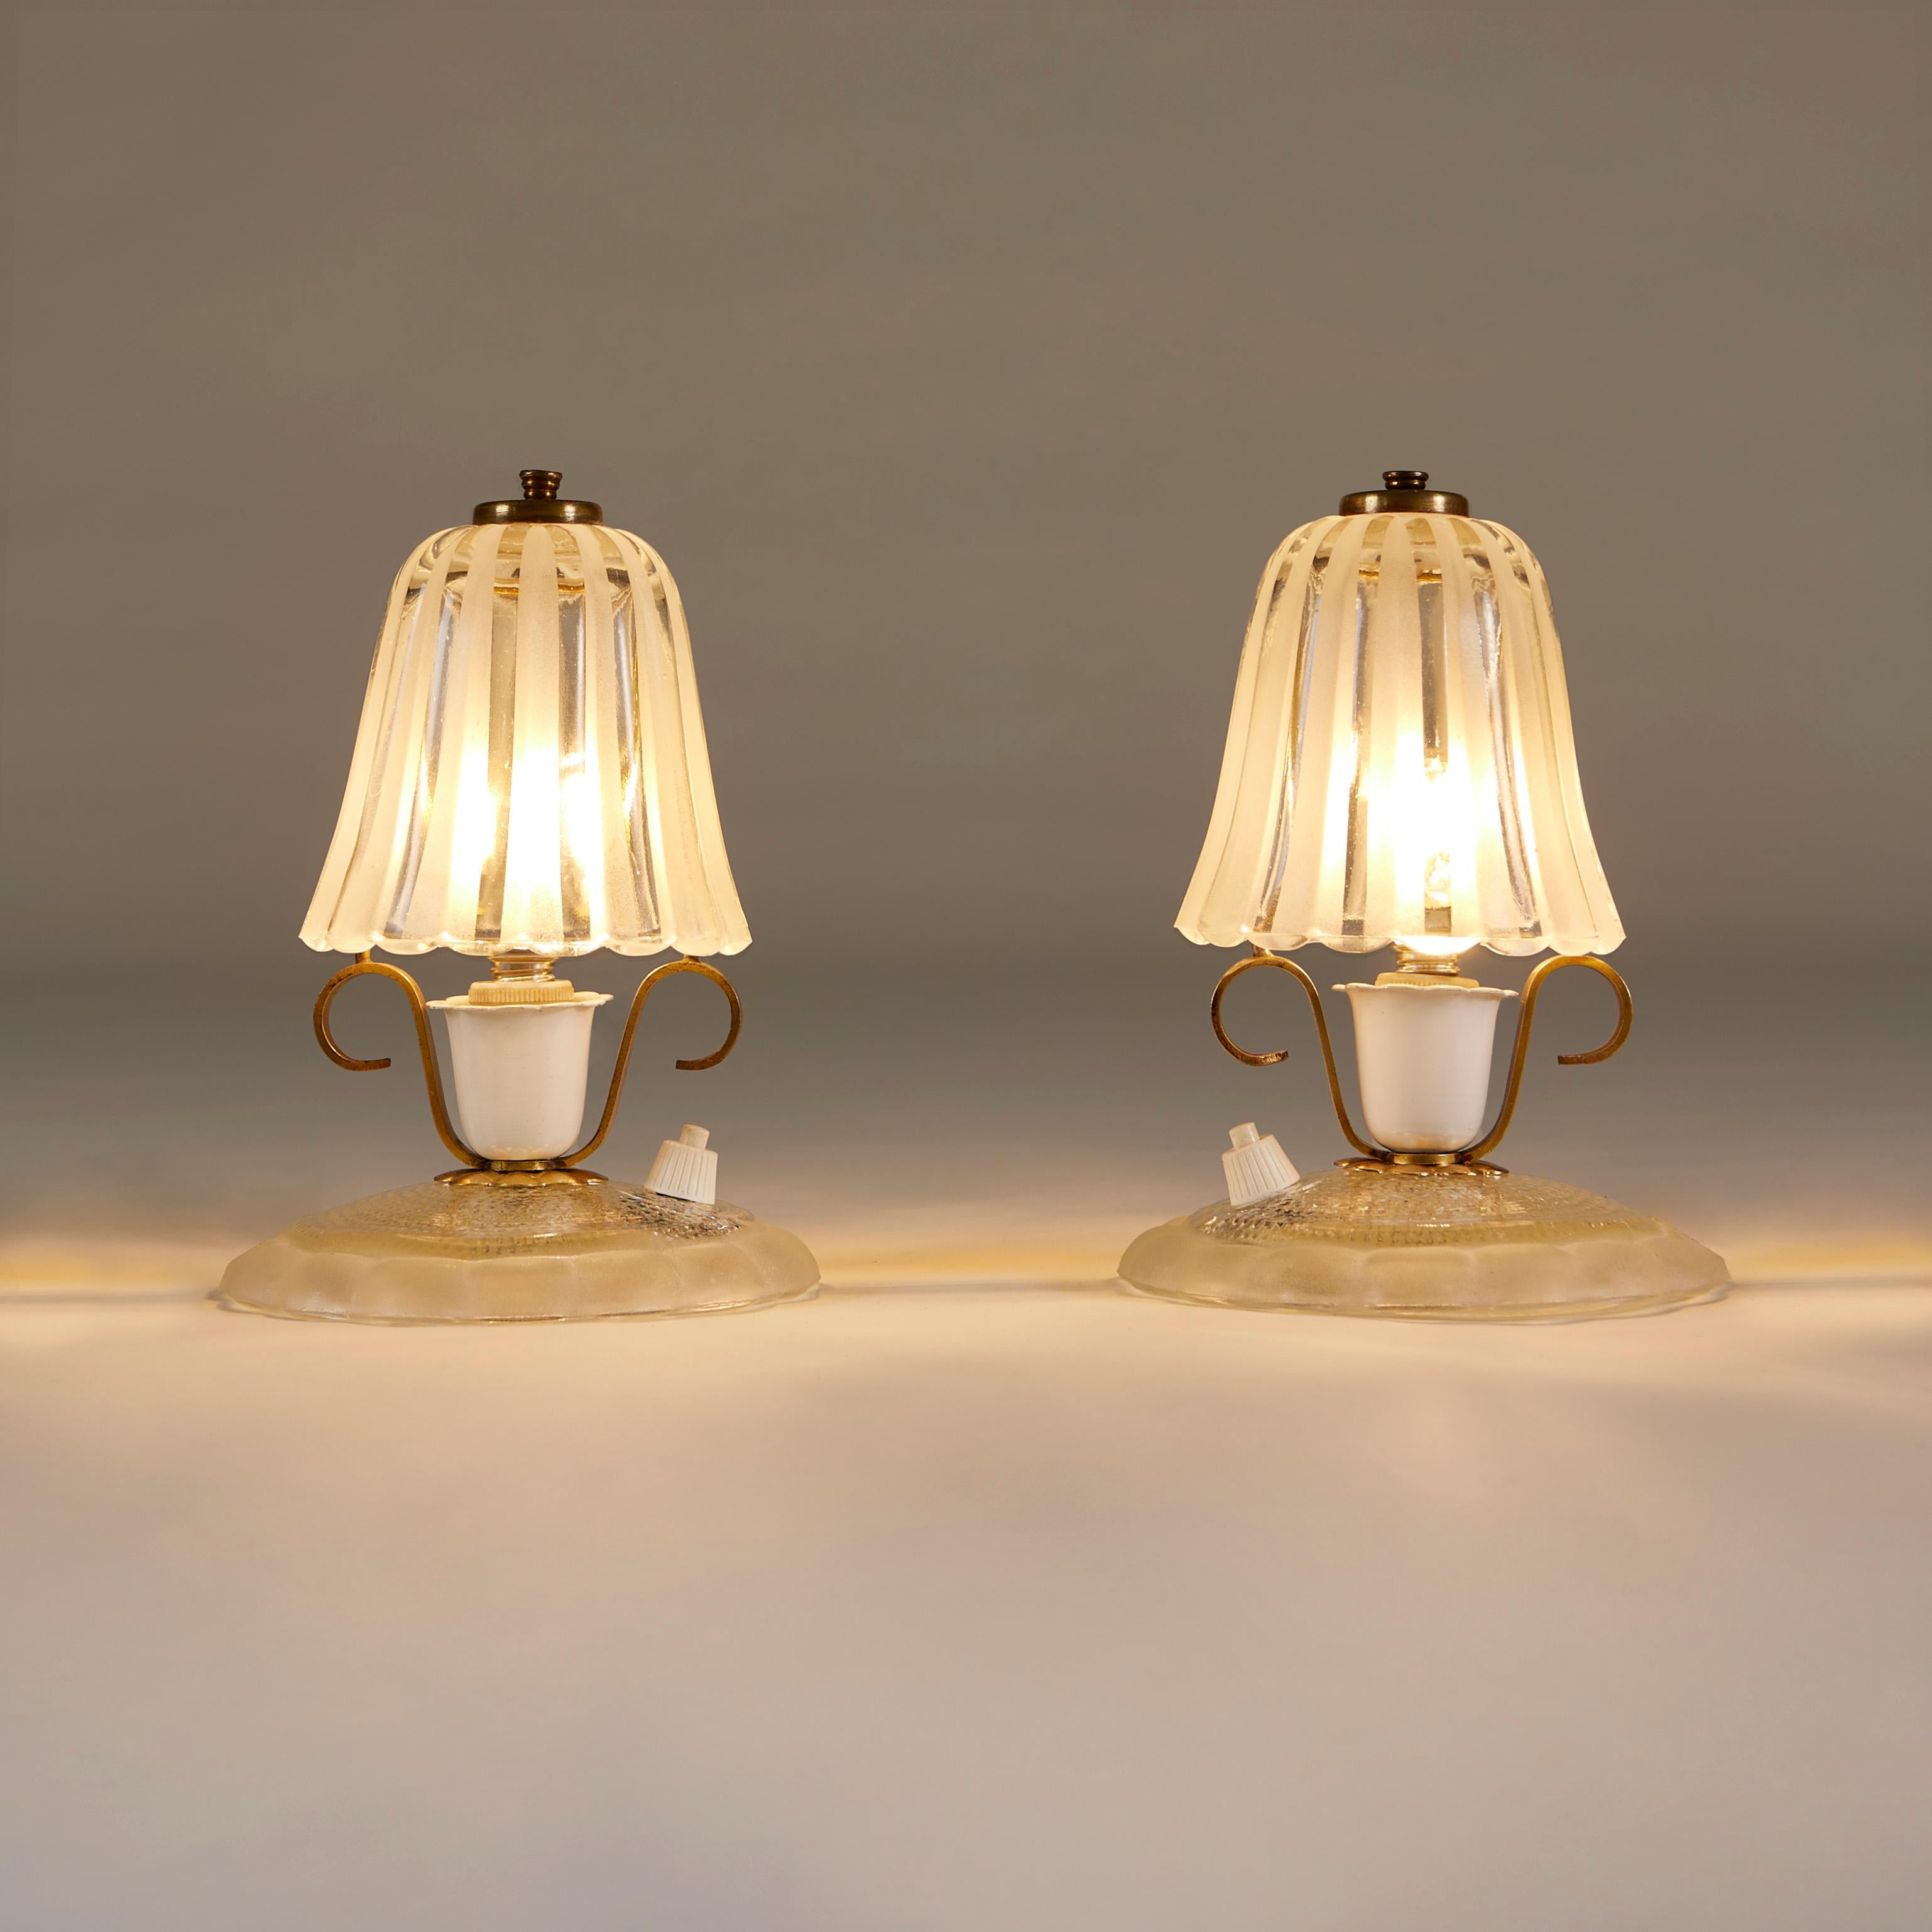 Unusual pair of shaped textured glass shades sit on circular scalloped glass base. Decorative brass accent details. Perfect for a dressing-table or desk or anywhere in need of a mood enhancing touch.